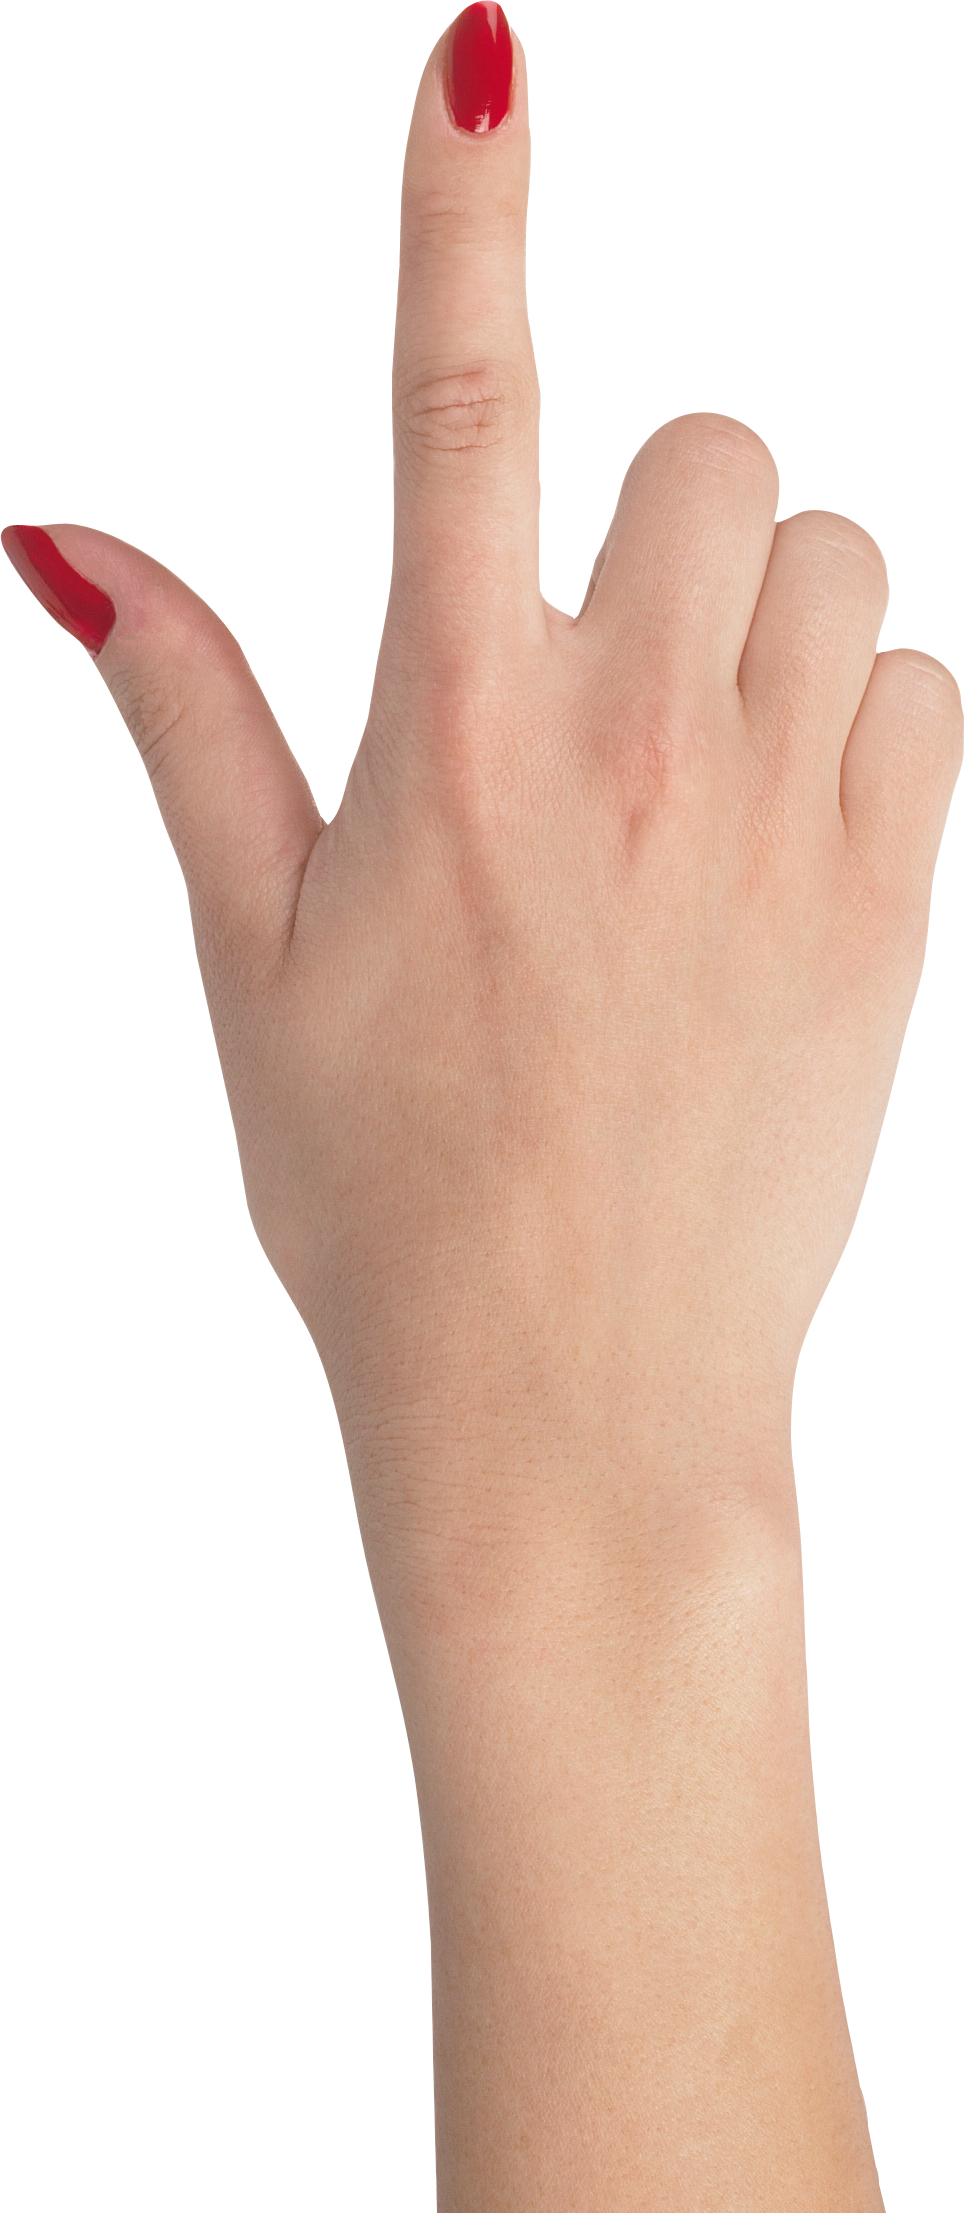 One Finger Hand With Red Nails, Hands Png, Hand Image Free - Hands, Transparent background PNG HD thumbnail